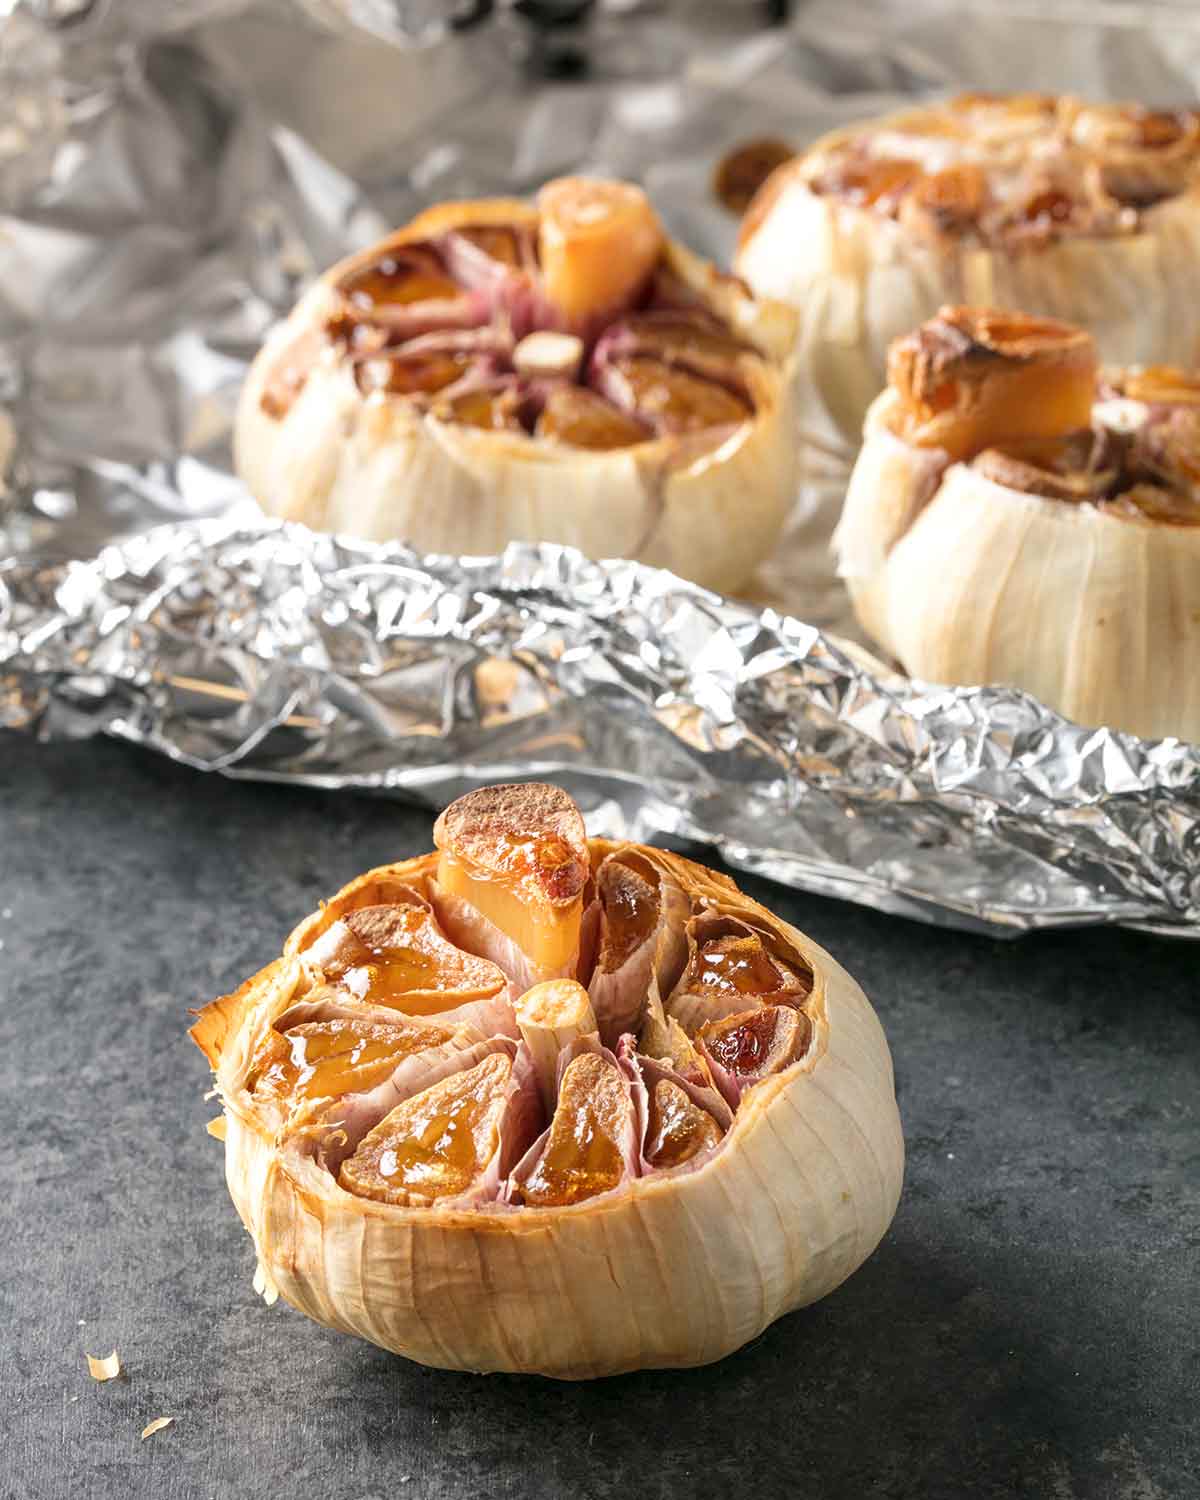 4 bulbs of roasted garlic with the tops cut off, 3 lying on a sheet of aluminium foil.